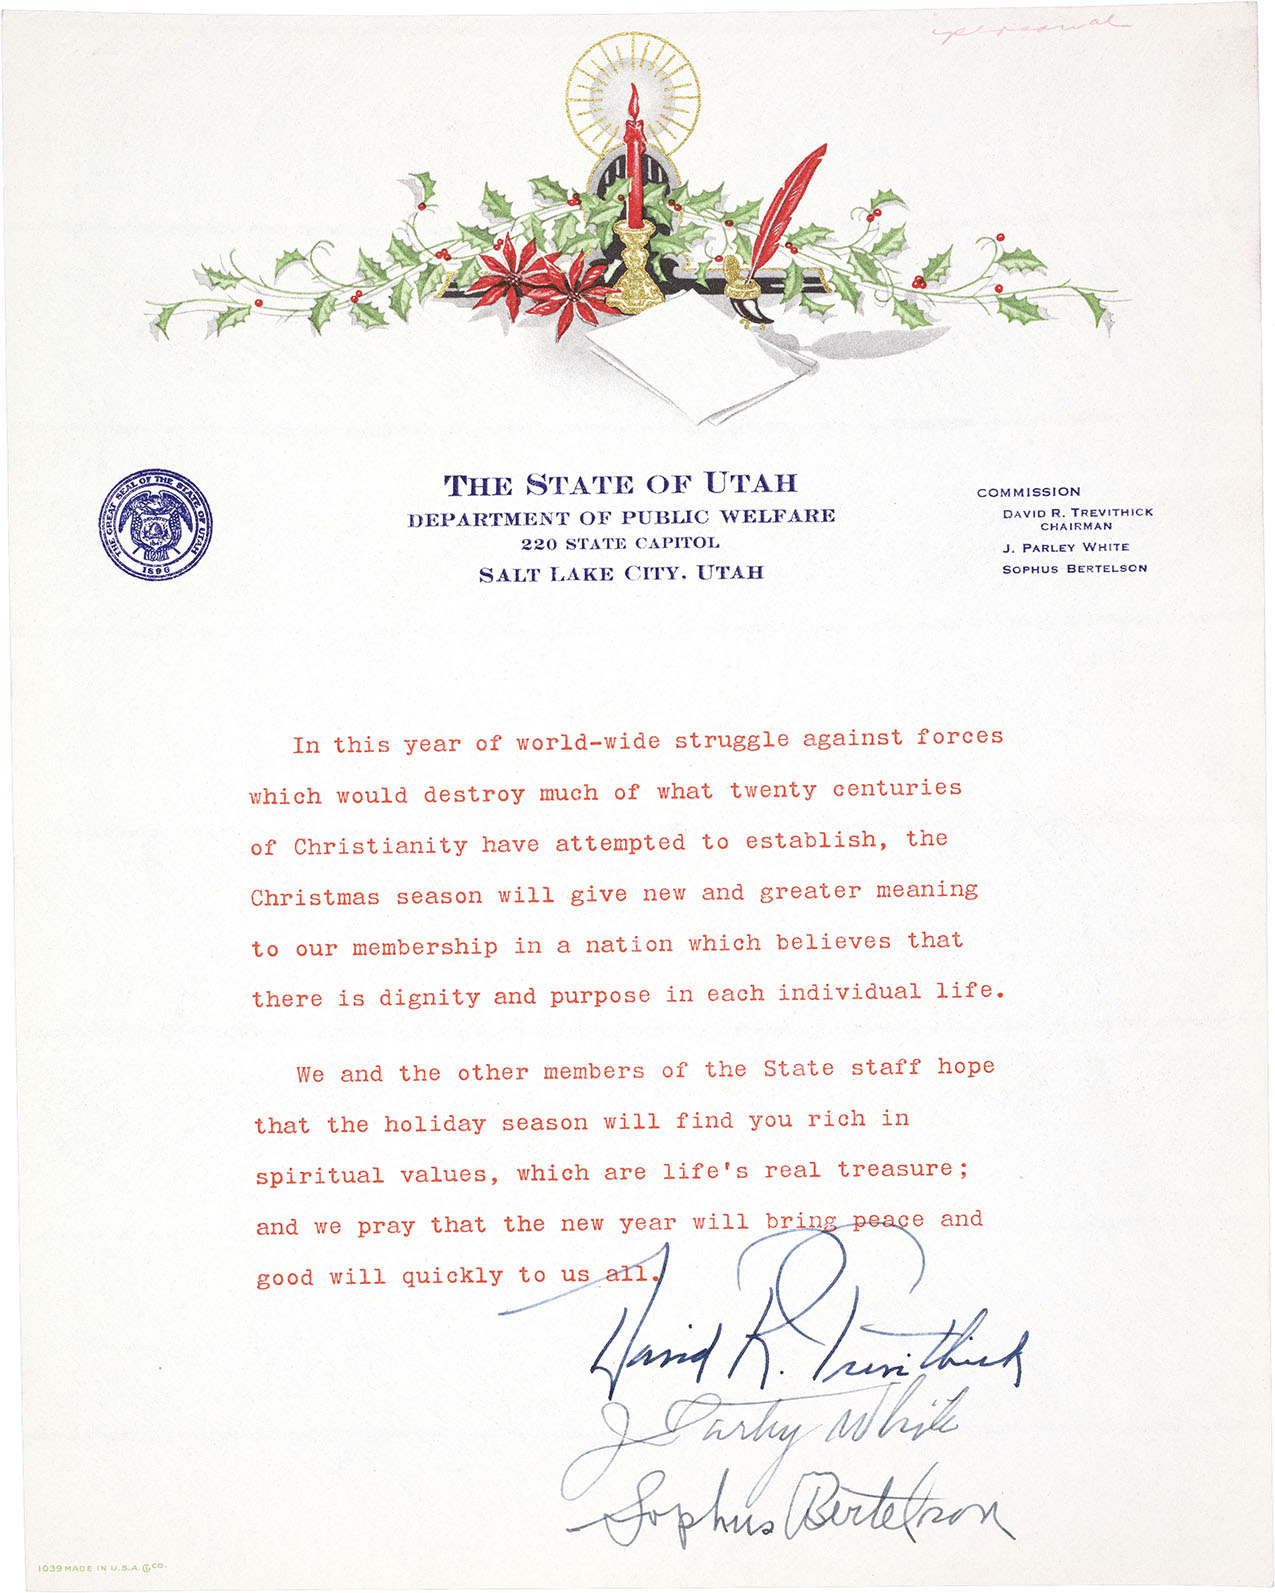 Happy Holidays from the Archives! - Utah State Archives and Records Service